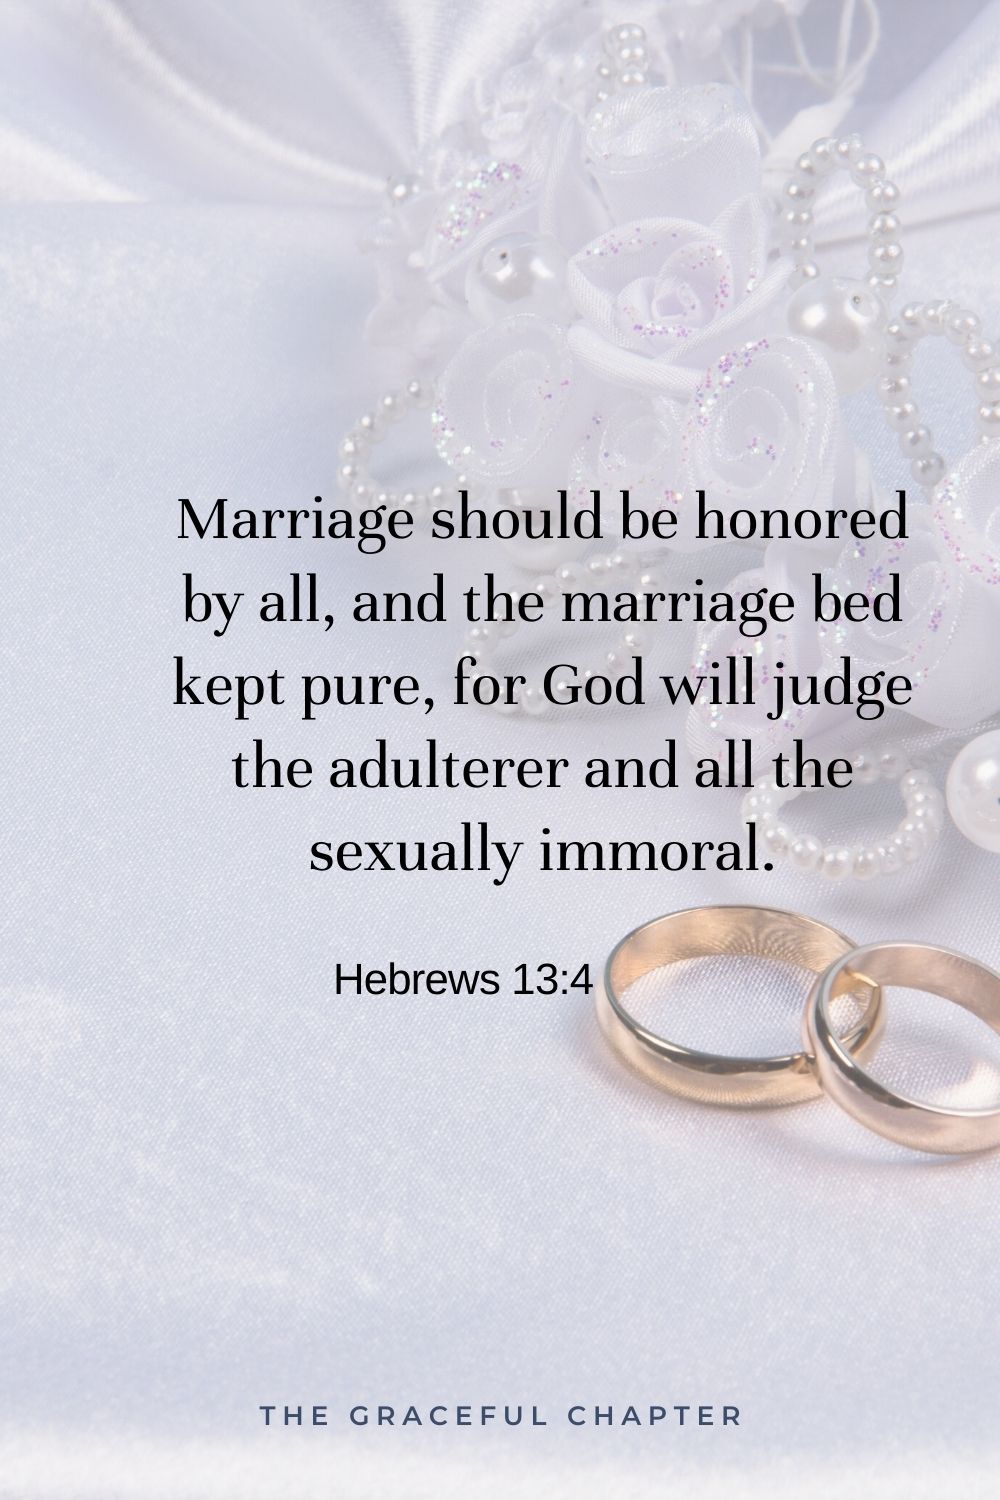 Marriage should be honored by all, and the marriage bed kept pure, for God will judge the adulterer and all the sexually immoral. Hebrews 13:4